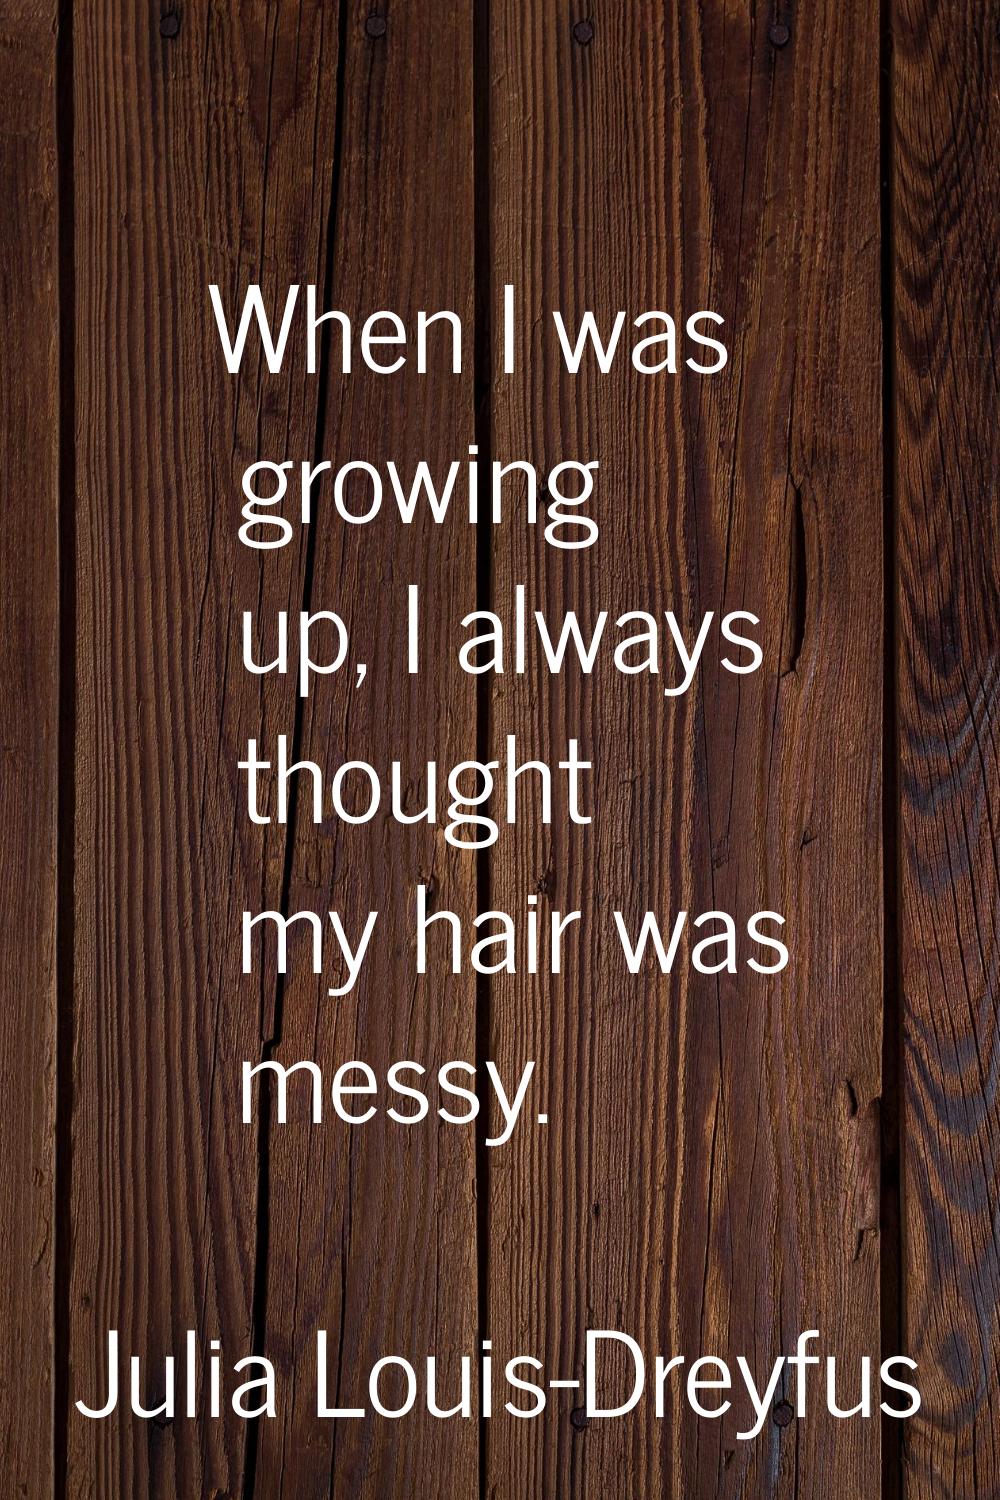 When I was growing up, I always thought my hair was messy.